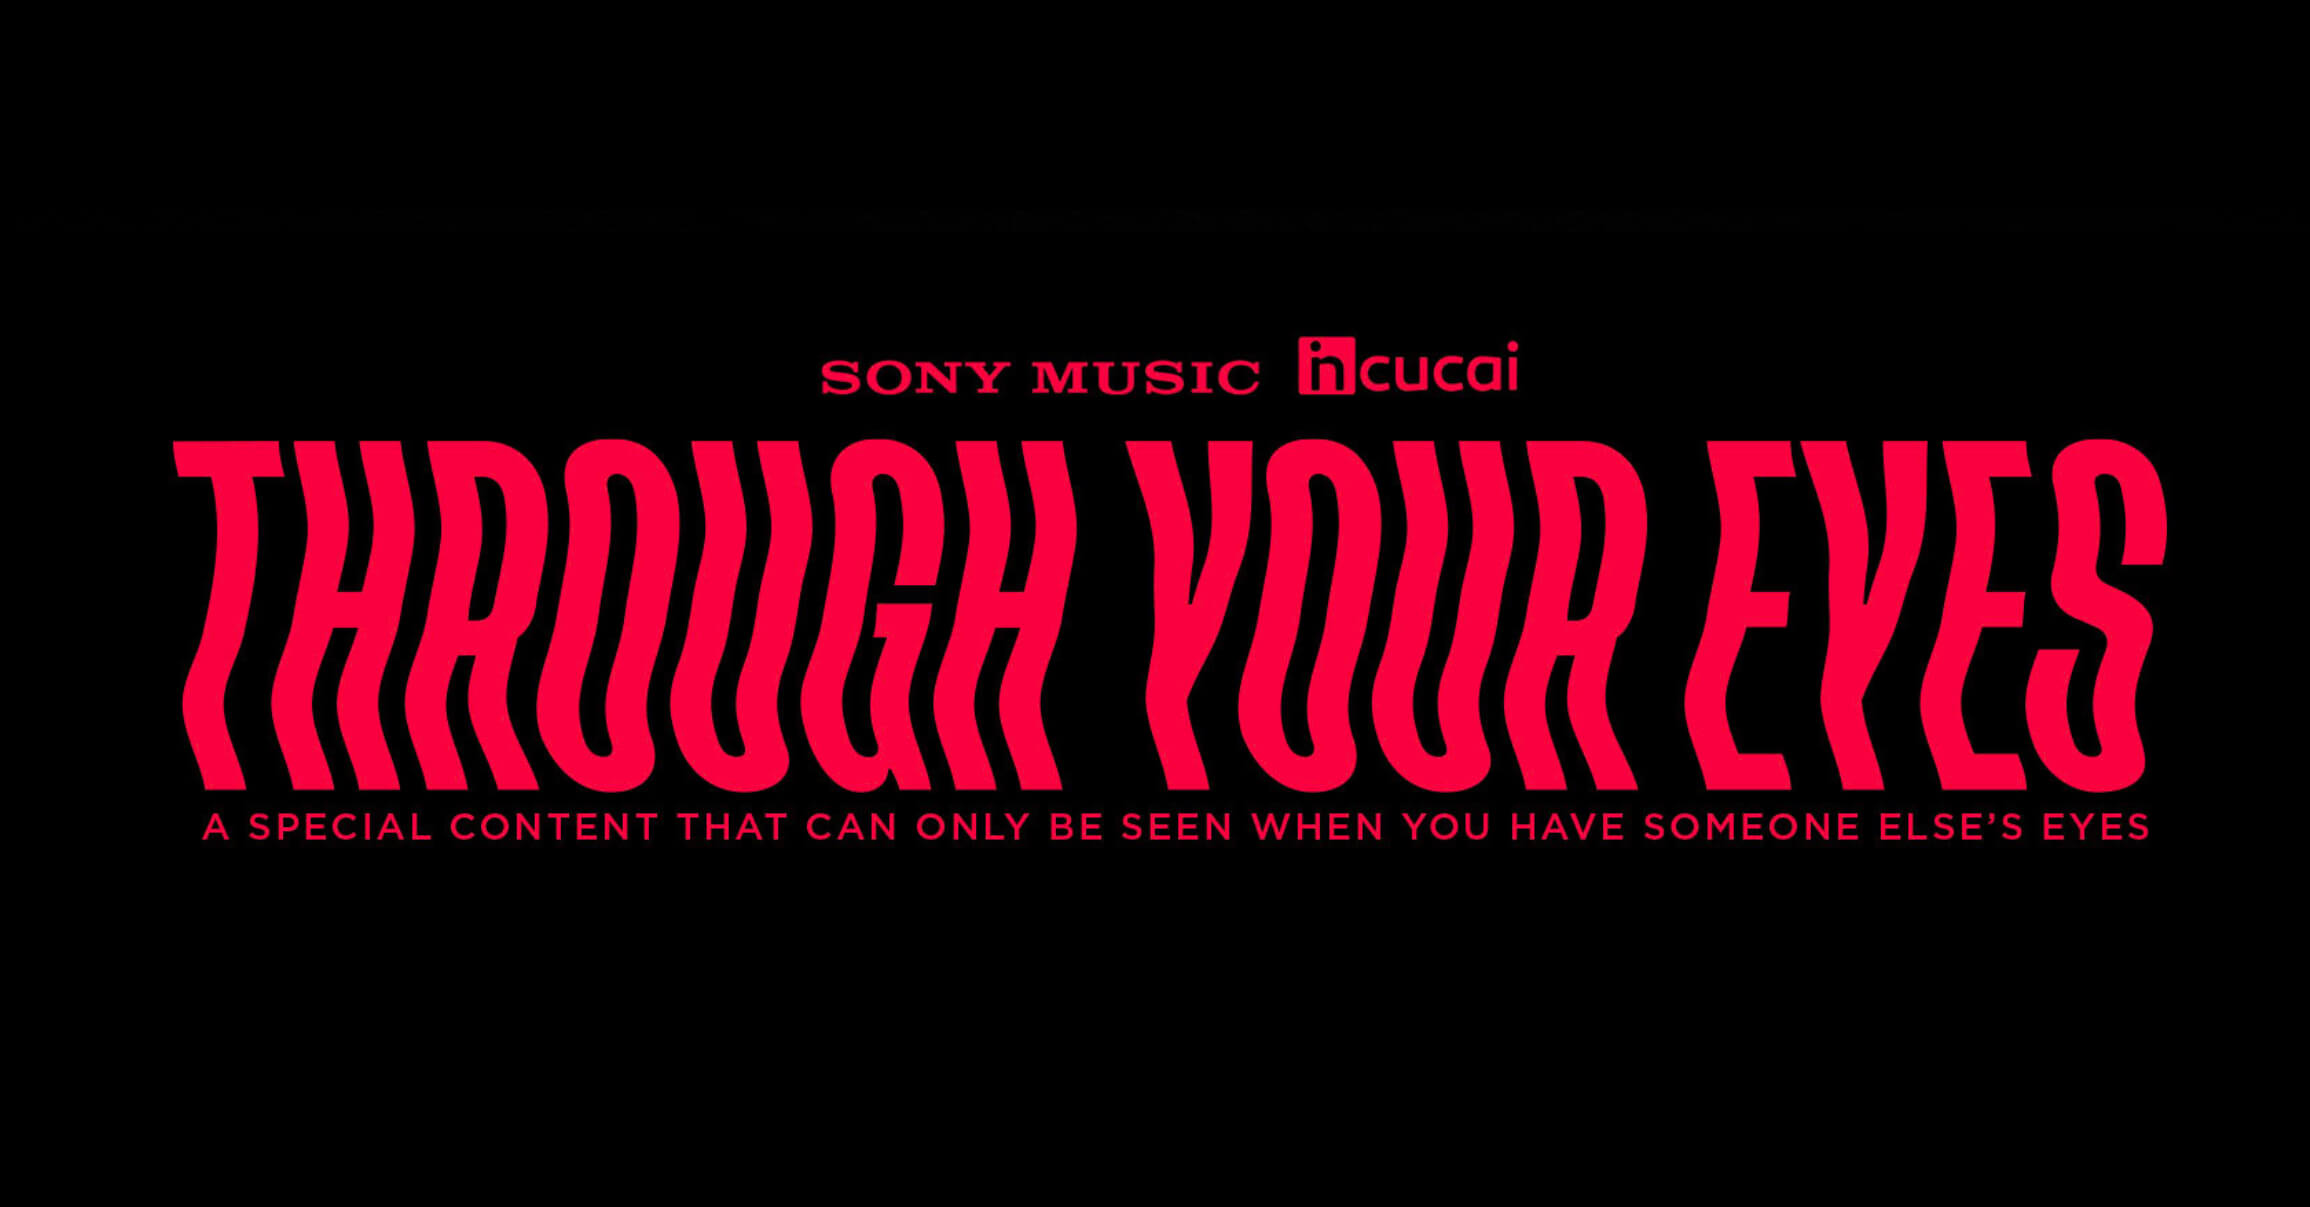 Through Your Eyes by Sony Music